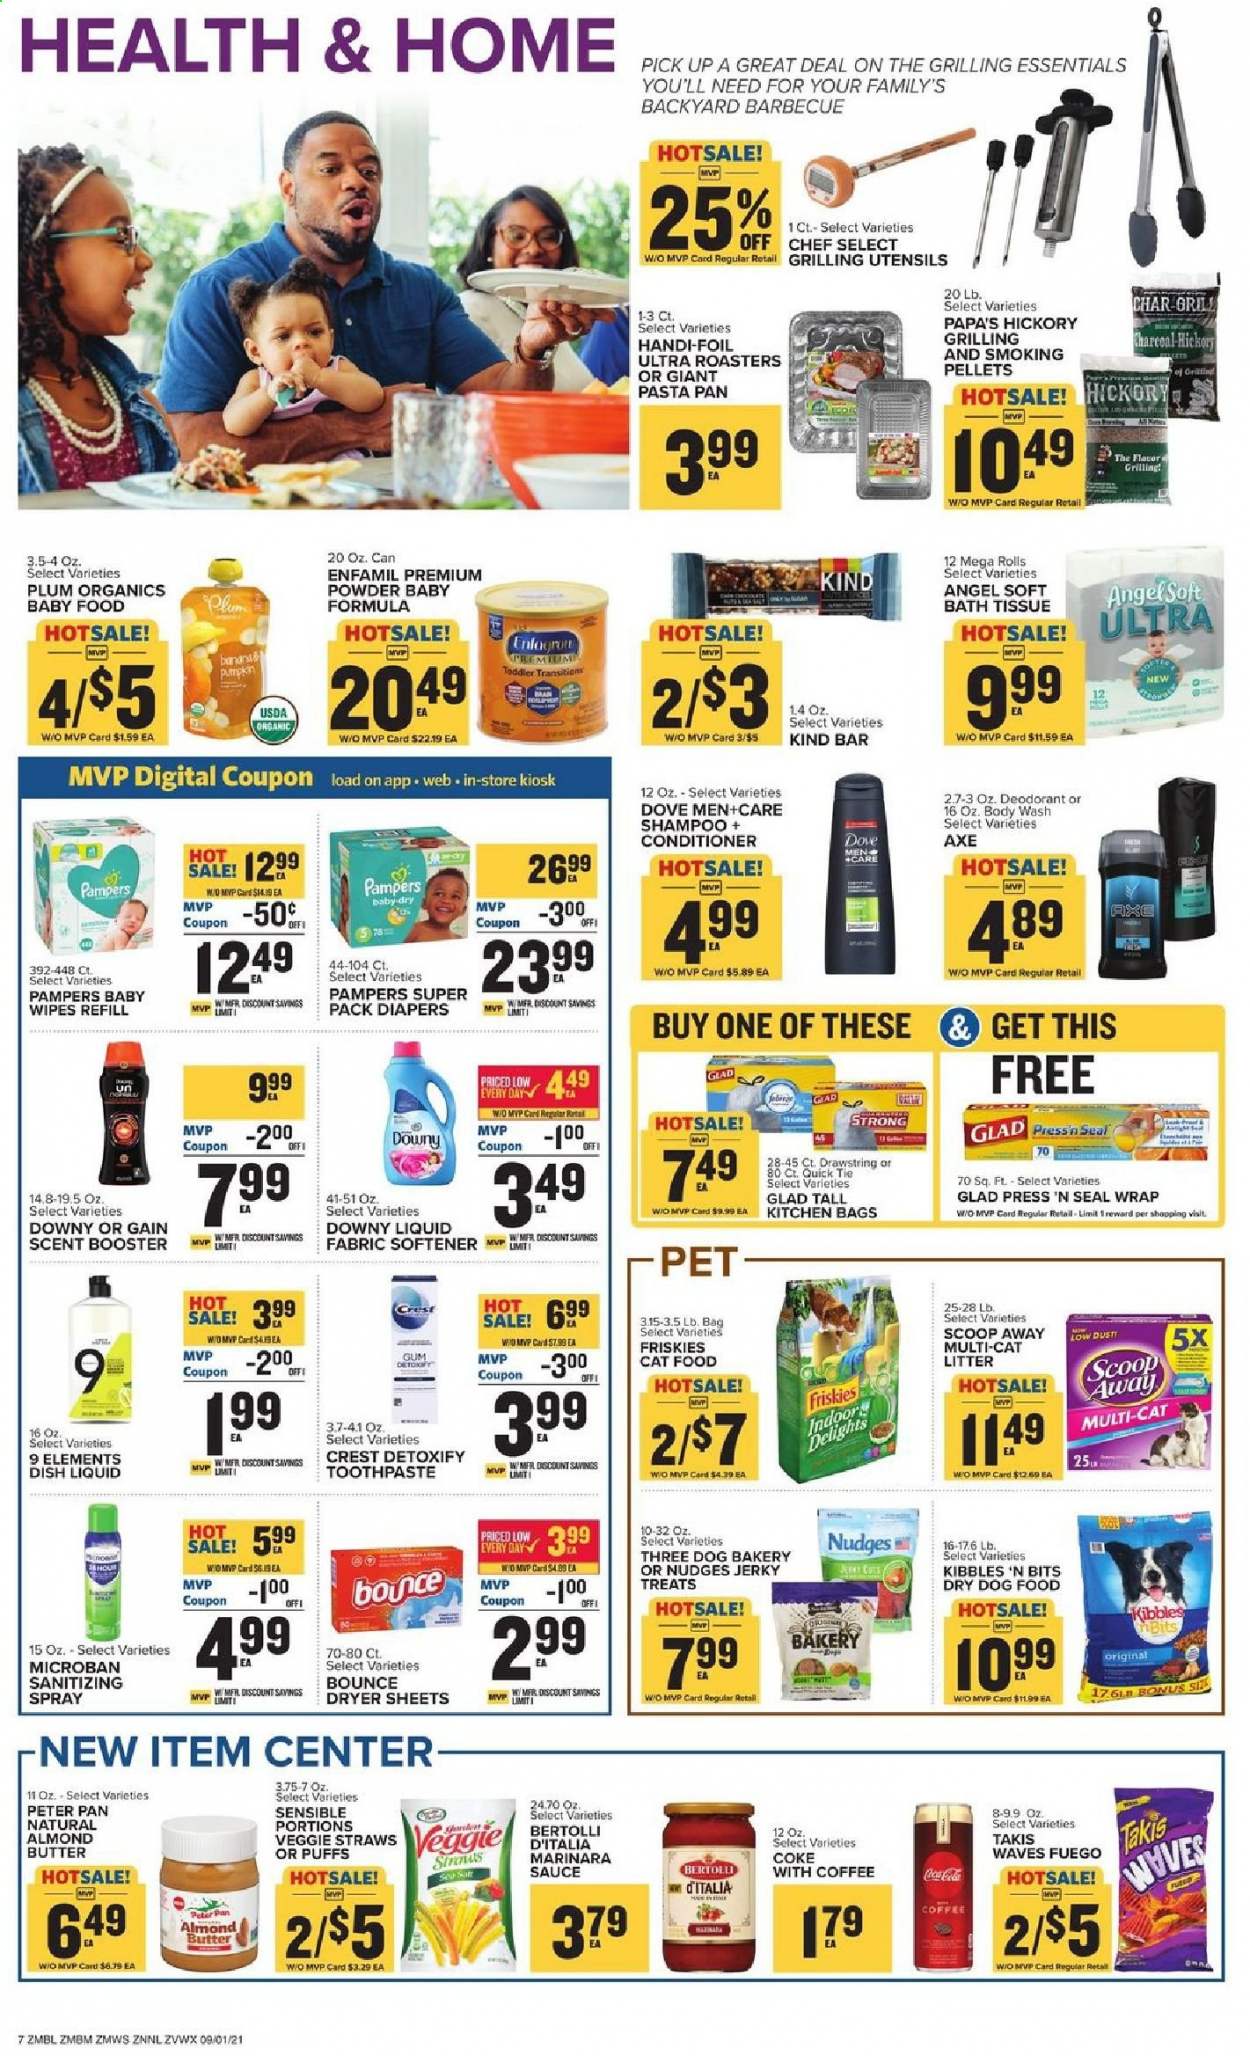 thumbnail - Food Lion Flyer - 09/01/2021 - 09/07/2021 - Sales products - puffs, leek, pumpkin, pasta, sauce, Bertolli, jerky, almond butter, Veggie Straws, Coca-Cola, coffee, Enfamil, wipes, Pampers, baby wipes, nappies, Dove, bath tissue, Gain, fabric softener, Bounce, dryer sheets, Downy Laundry, dishwashing liquid, body wash, shampoo, toothpaste, Crest, conditioner, anti-perspirant, deodorant, utensils, pan, cat litter, animal food, cat food, dog food, dry dog food, Friskies. Page 7.